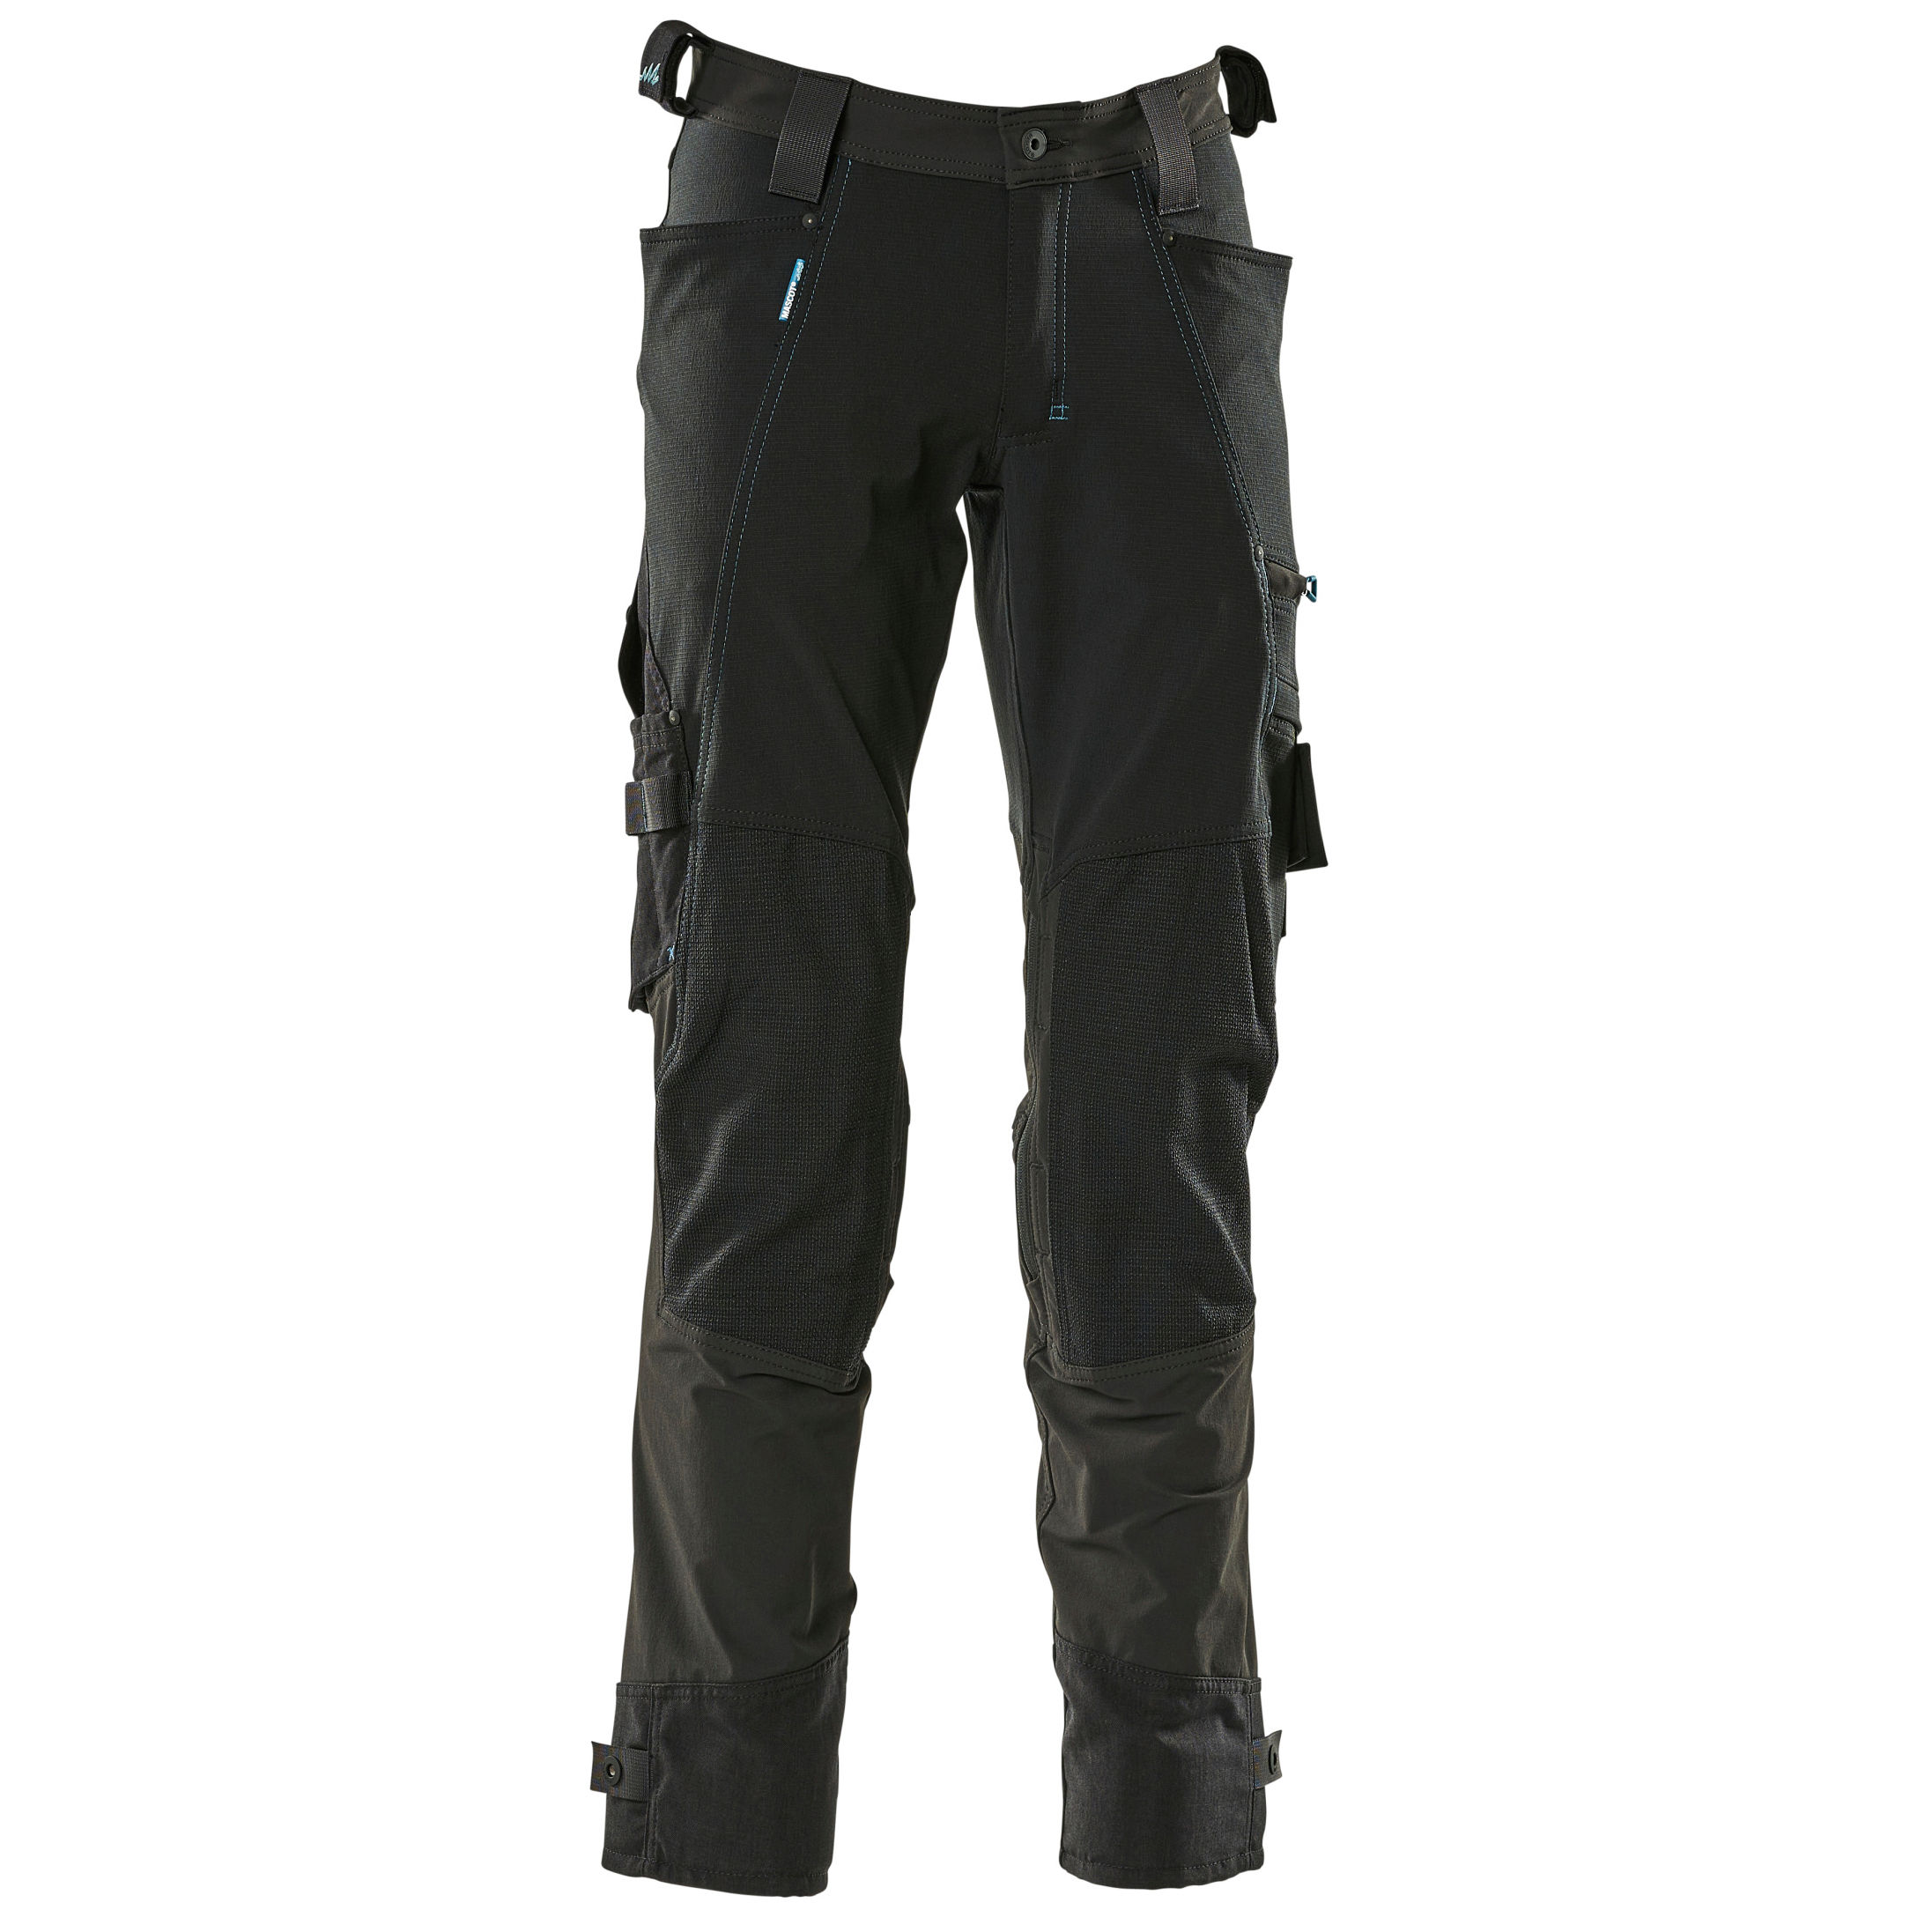 Mascot Advanced Trousers with Kneepad Pockets